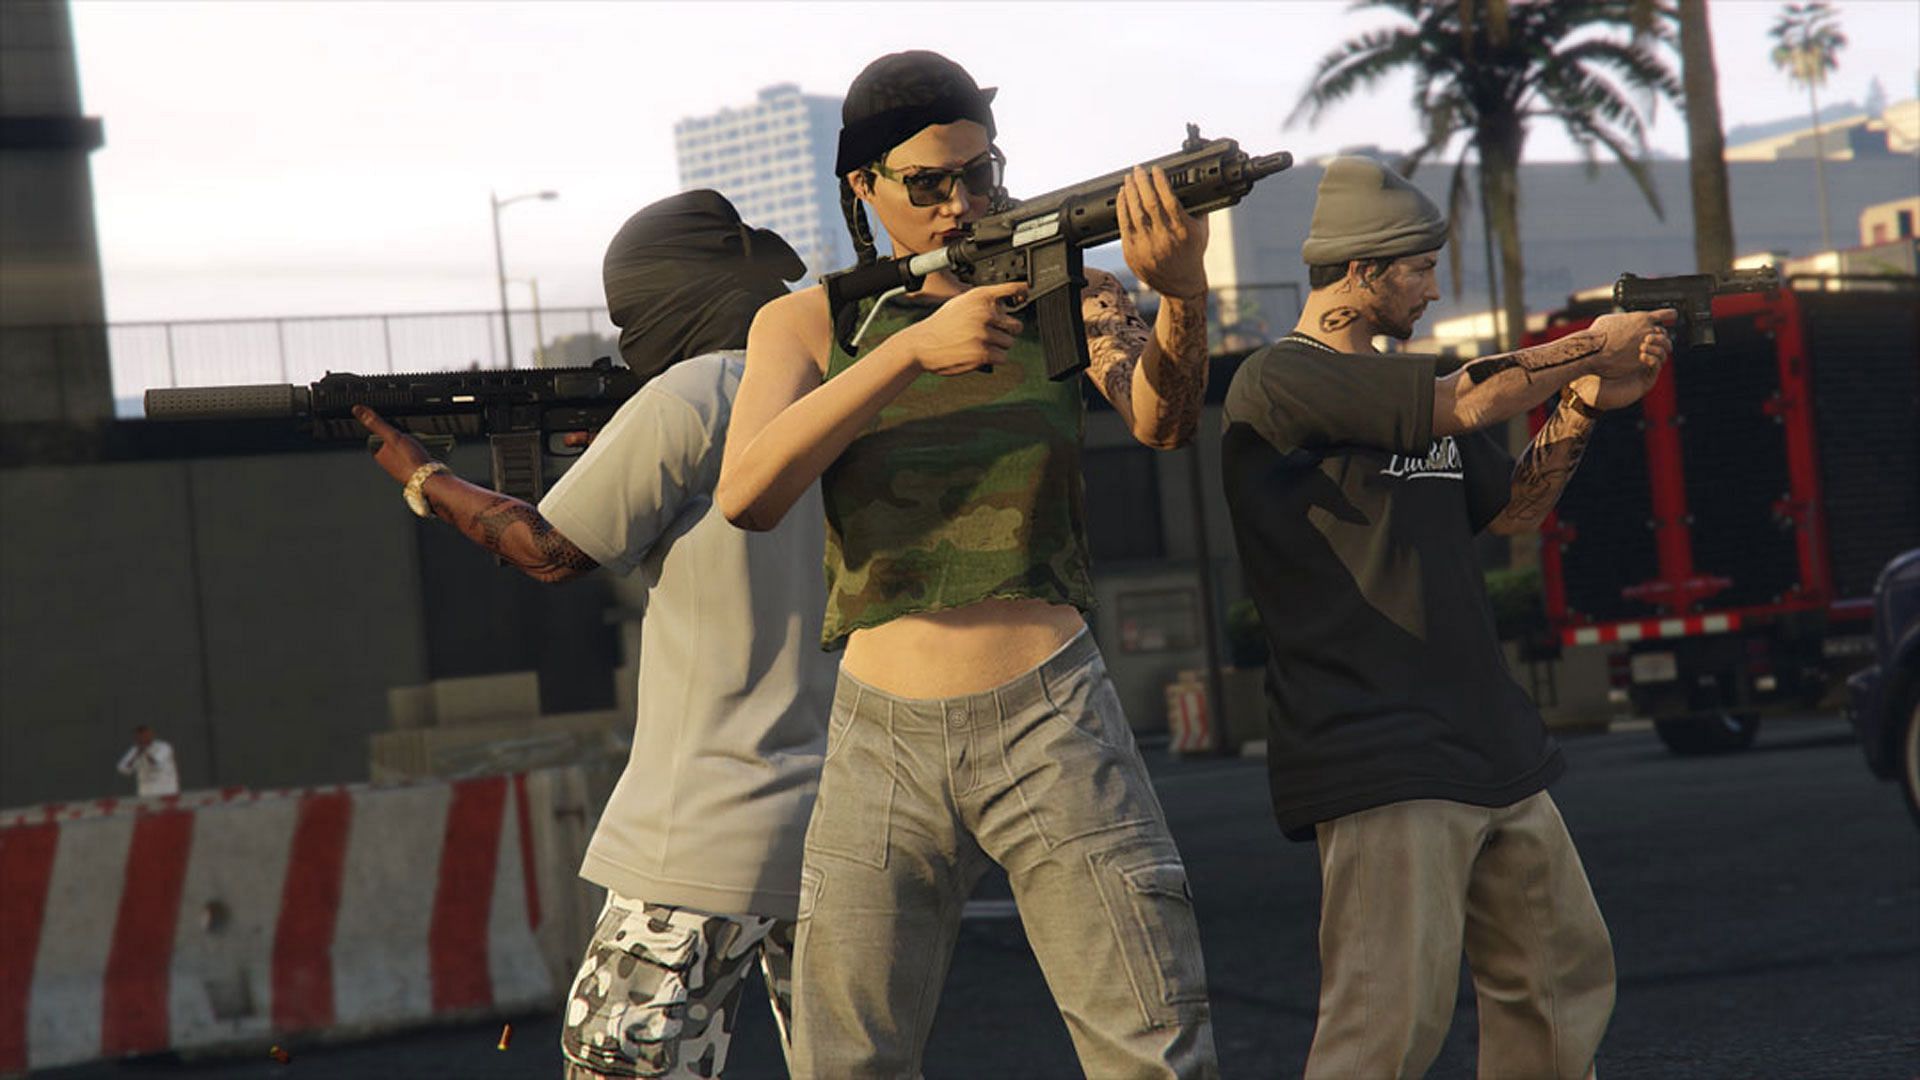 GTA Online currently offers 99 distinct weapon choices to players (Image via Rockstar Games)